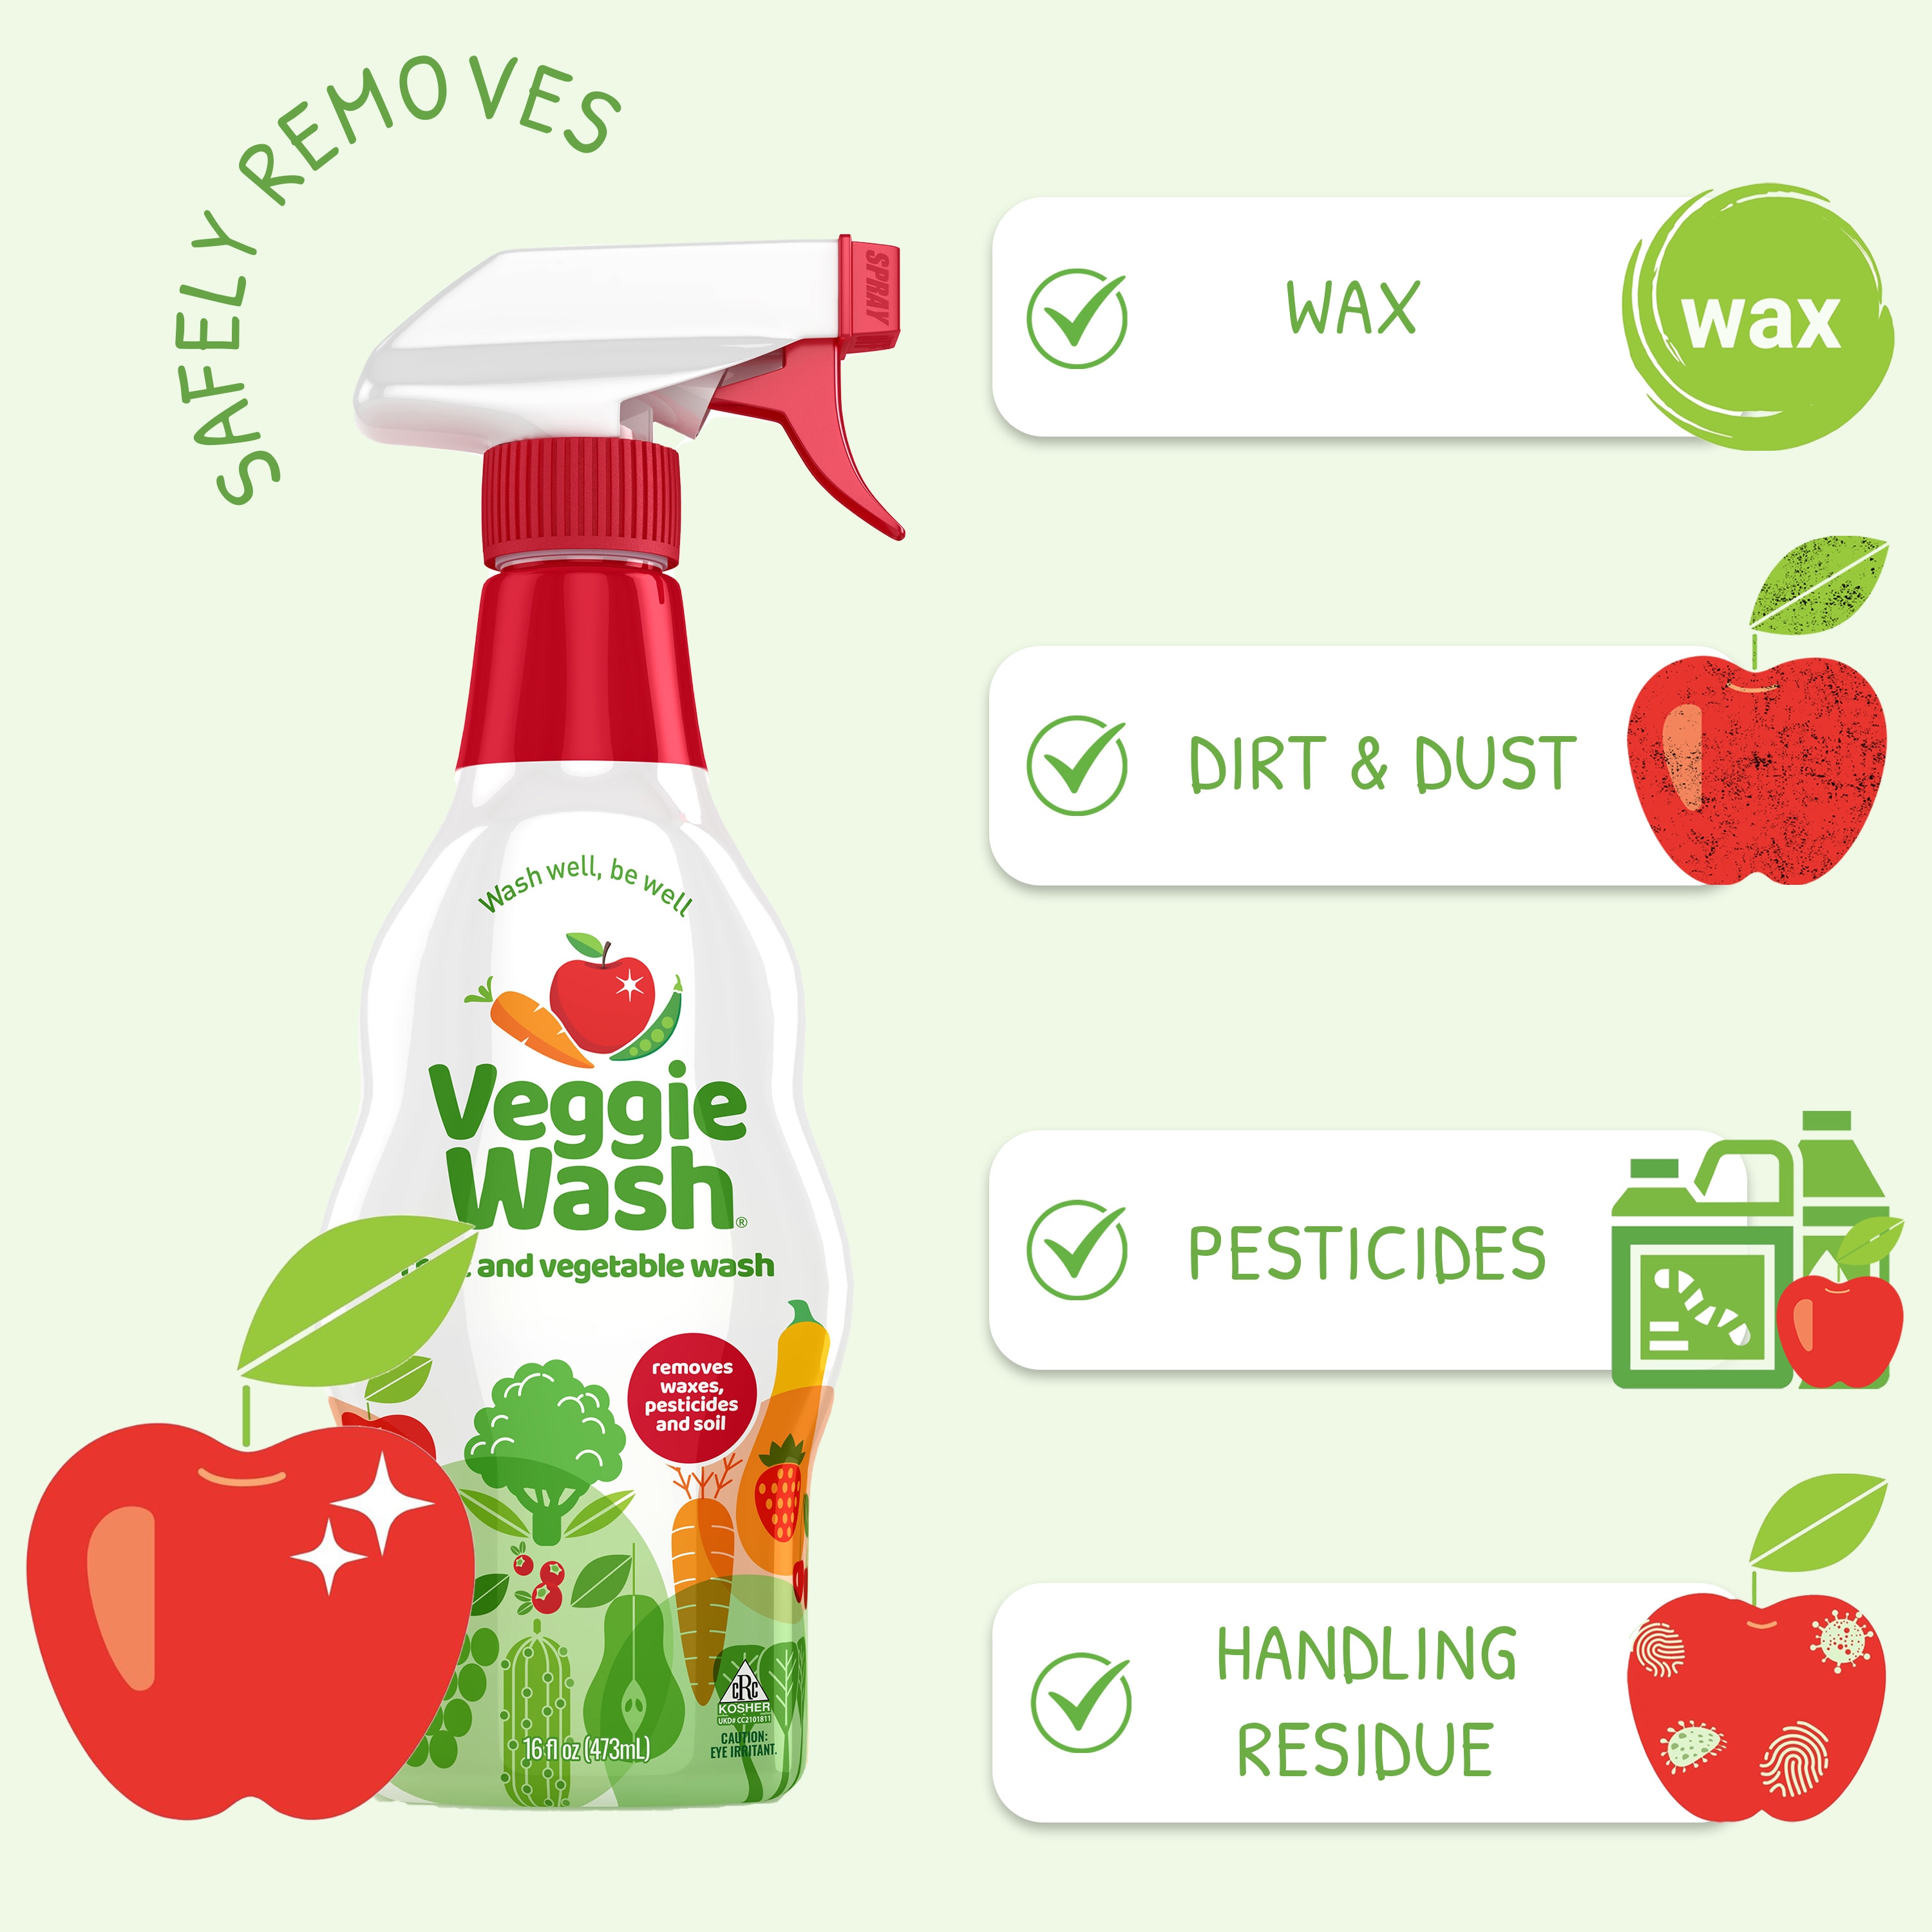 Fruit and Veggie Clean (17 oz)